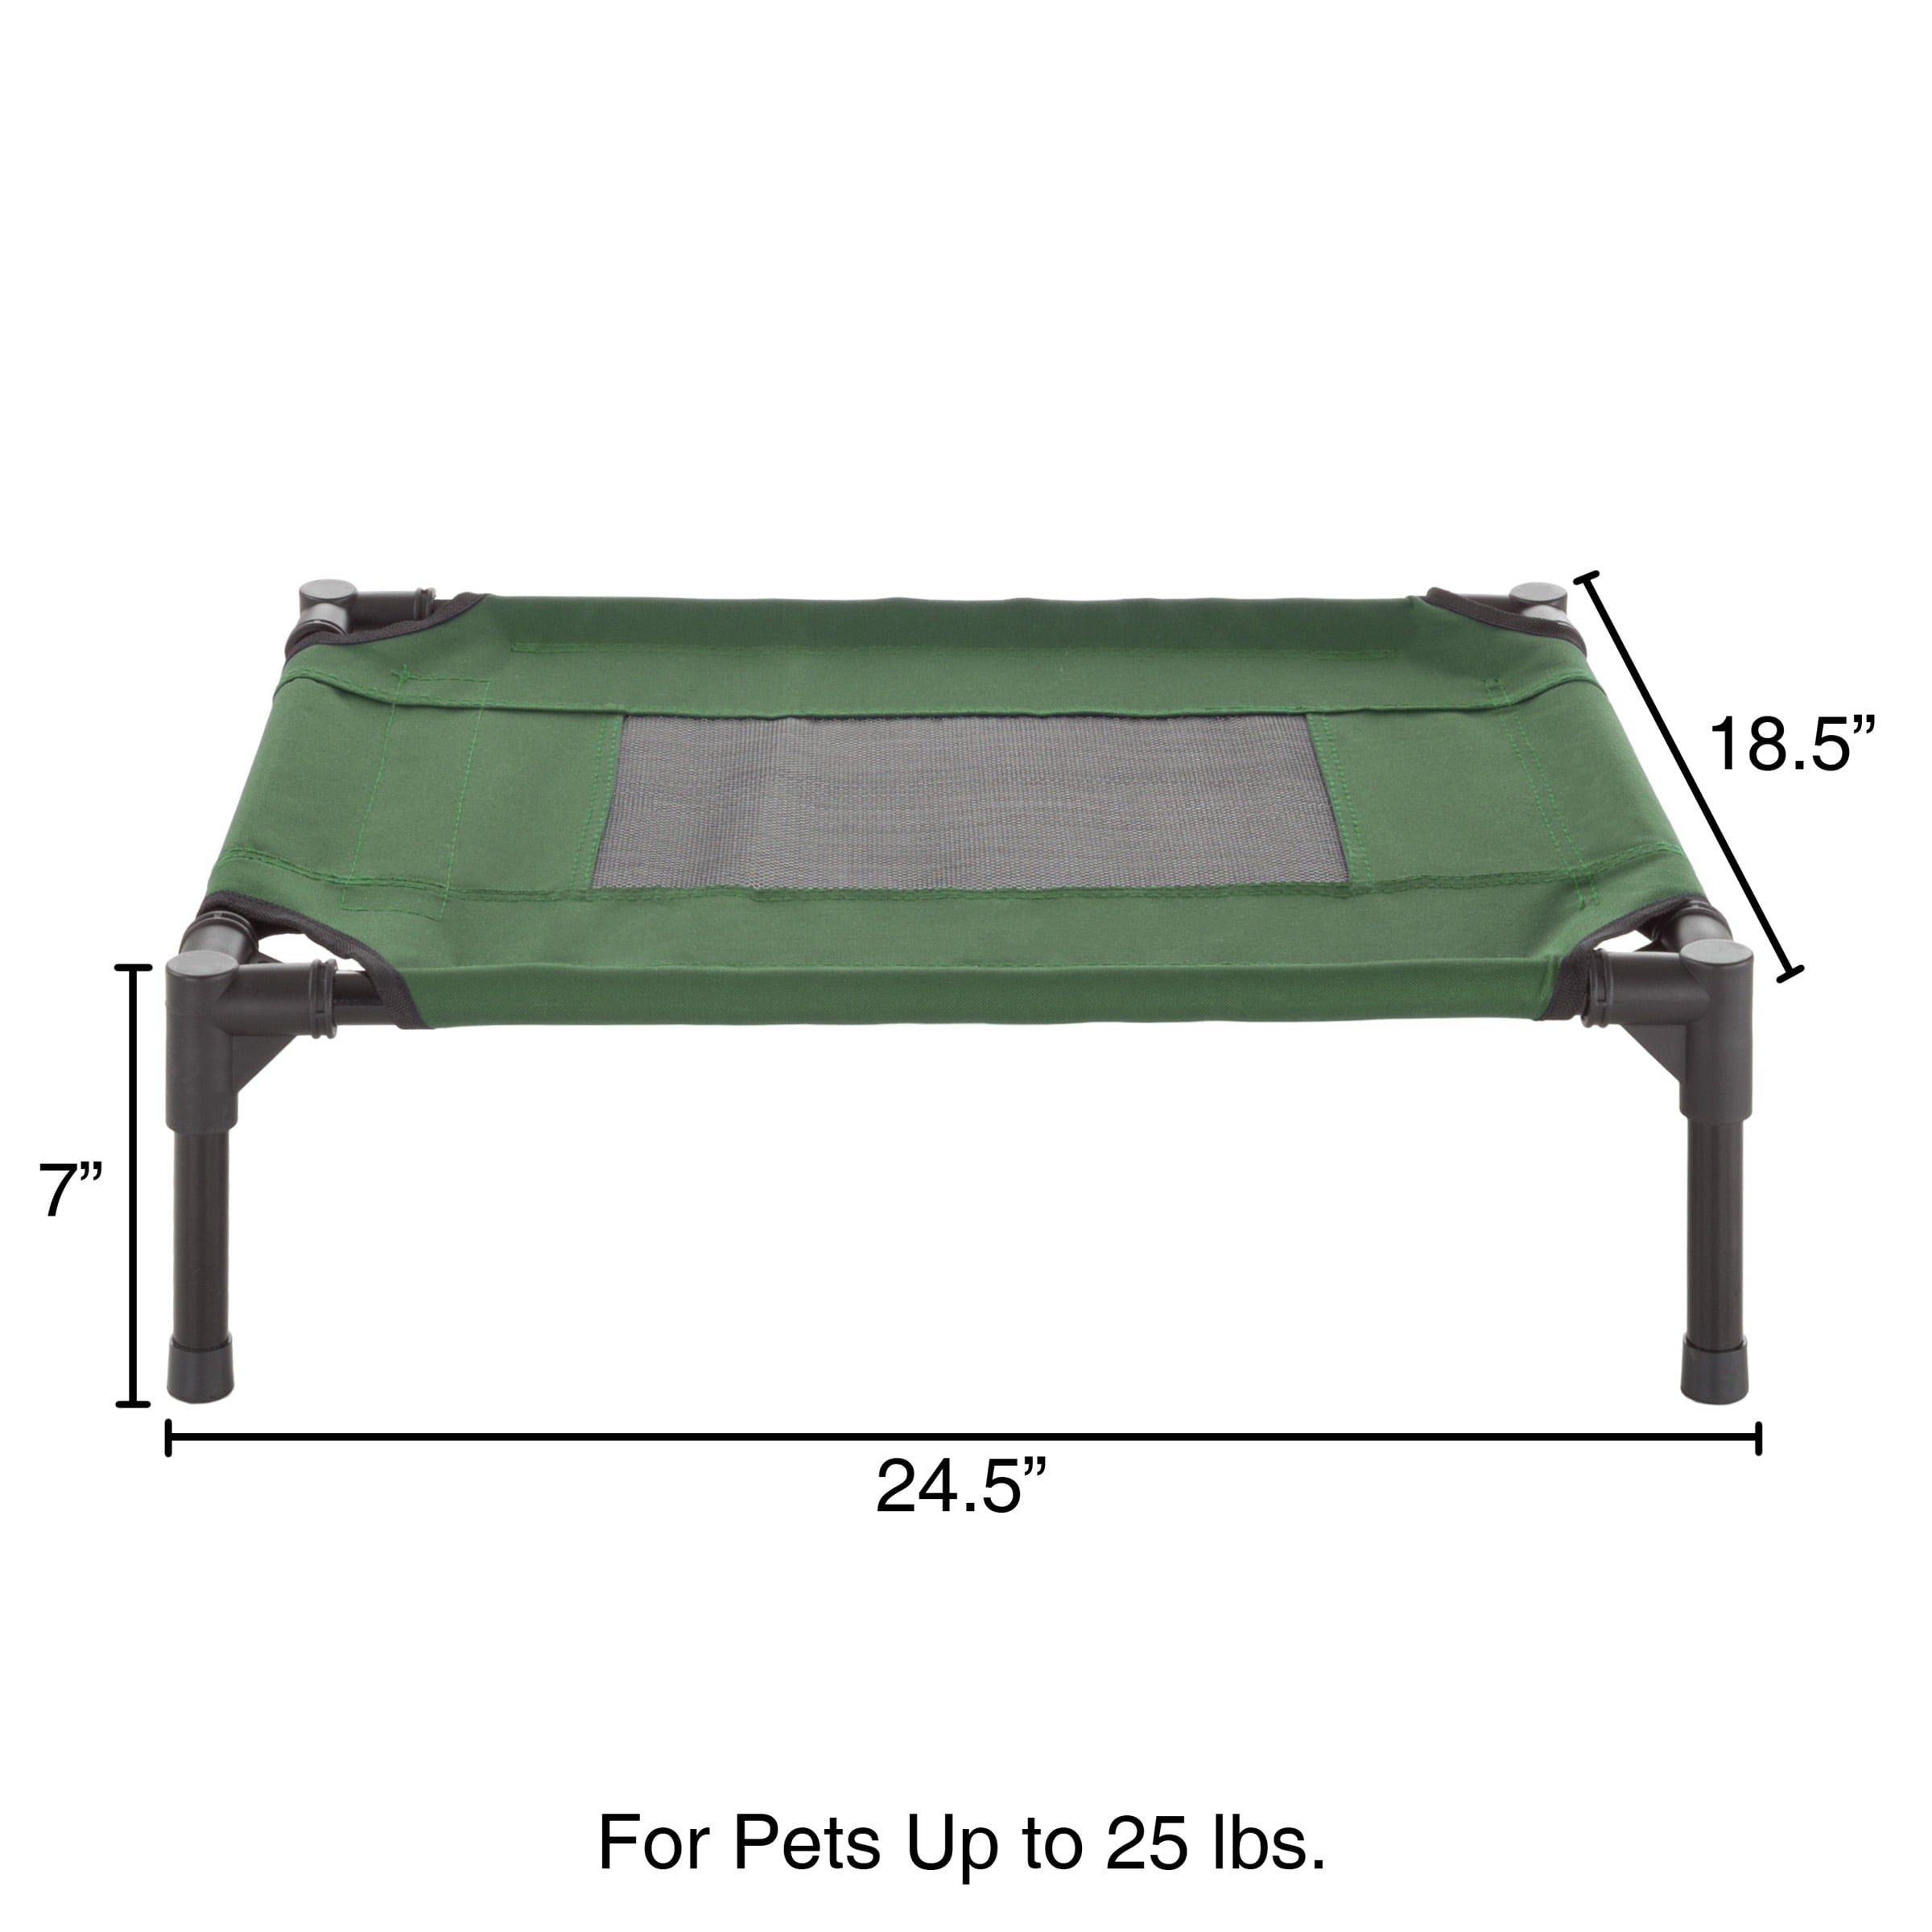 Elevated Dog Bed – 24.5x18.5 Portable Bed for Pets with Non-Slip Feet – Indoor/Outdoor Dog Cot or Puppy Bed for Pets up to 25lbs by Petmaker (Green)